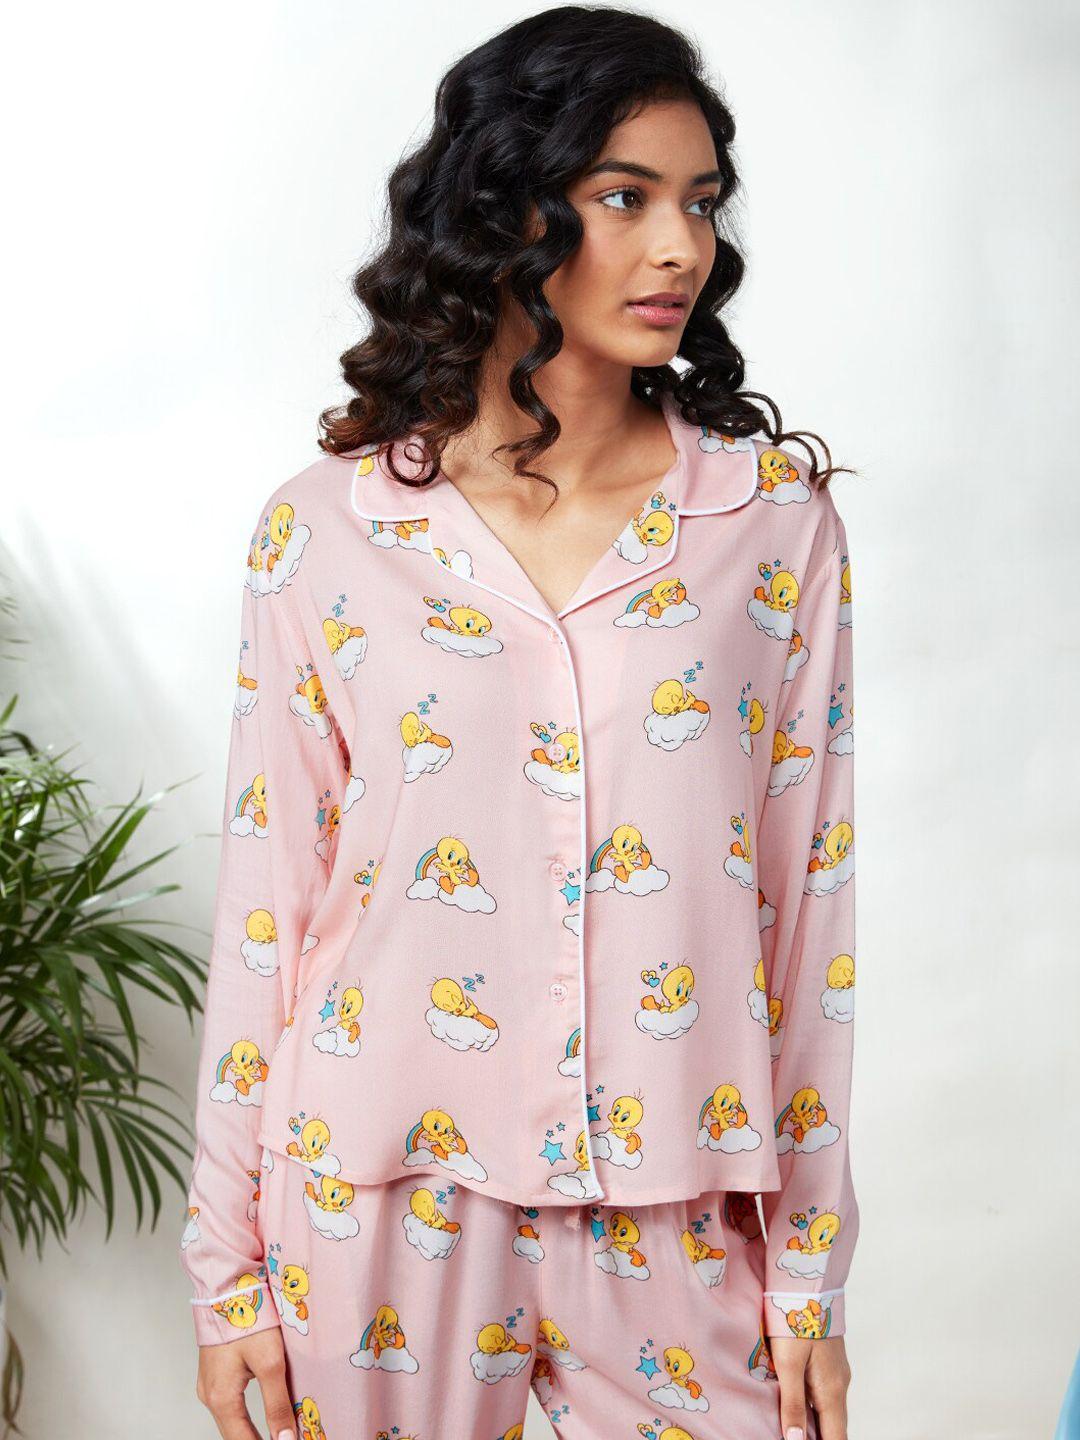 the souled store women purple & yellow looney tunes printed night suit